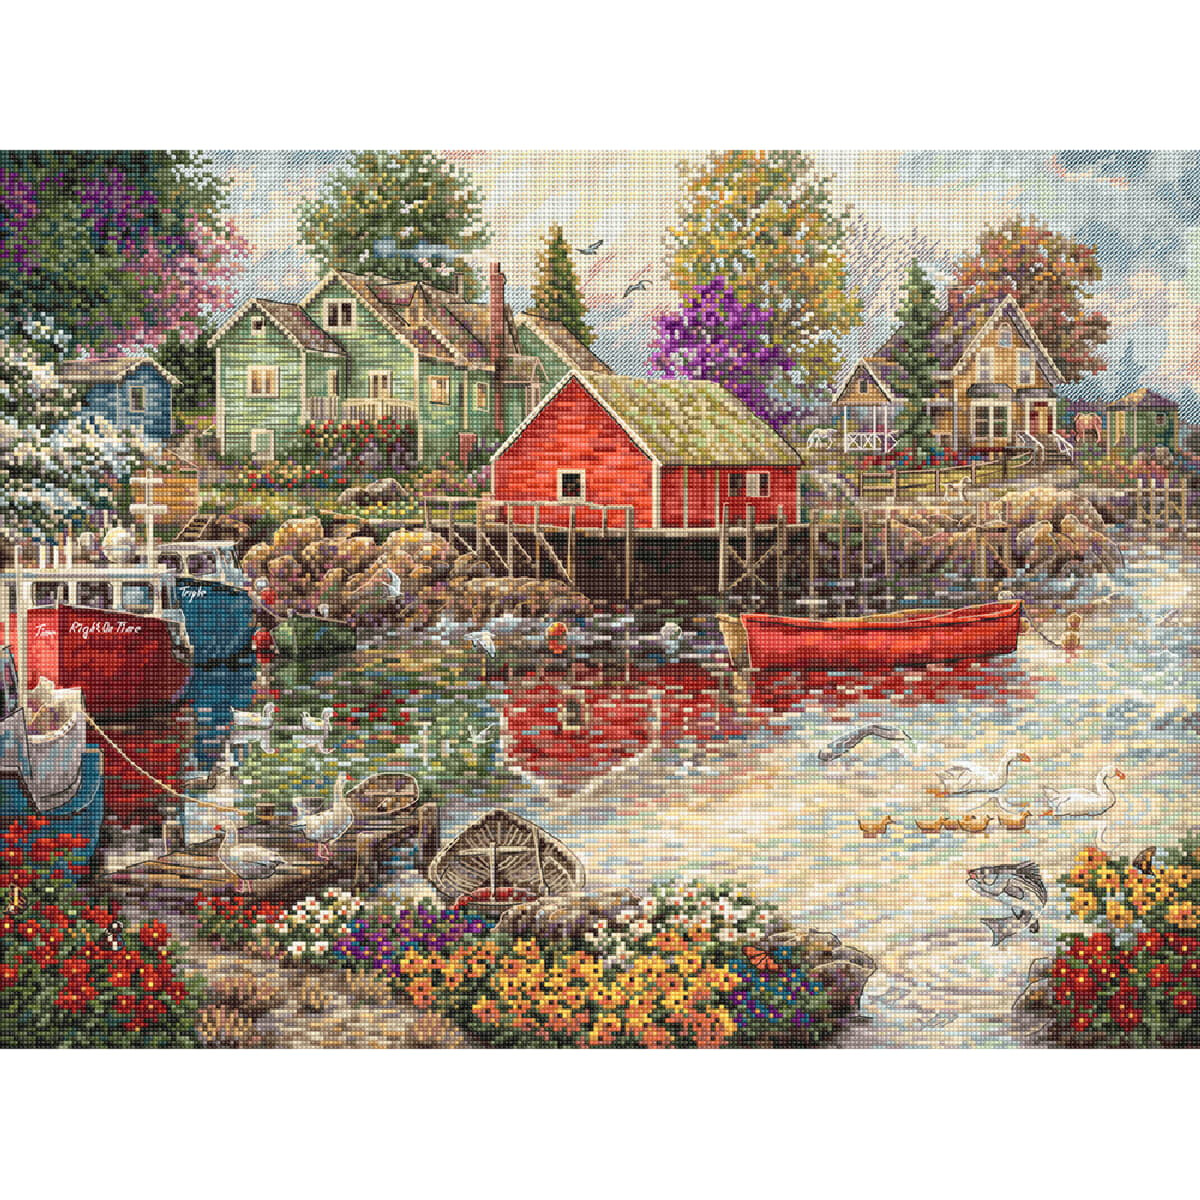 A colorful, tranquil village scene by a river,...